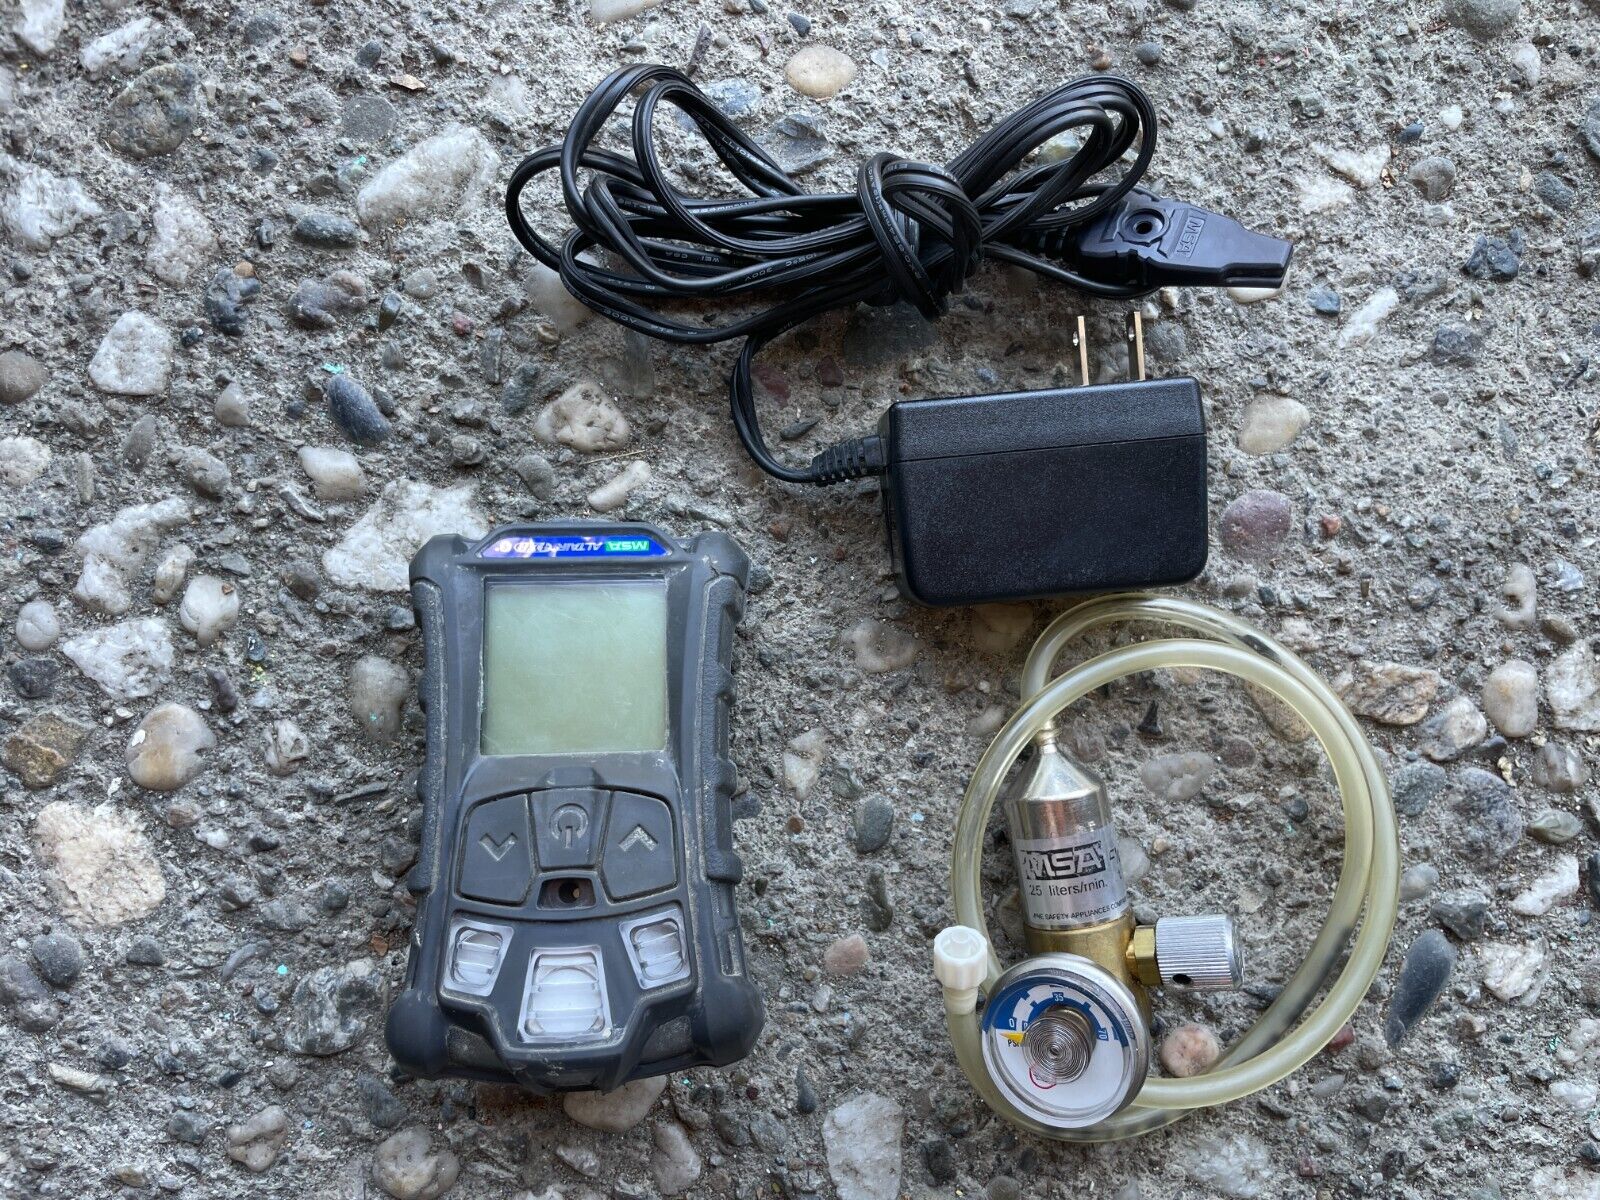 ꙮ MSA ALTAIR 4X Multigas Monitor Detector with charger  - Used